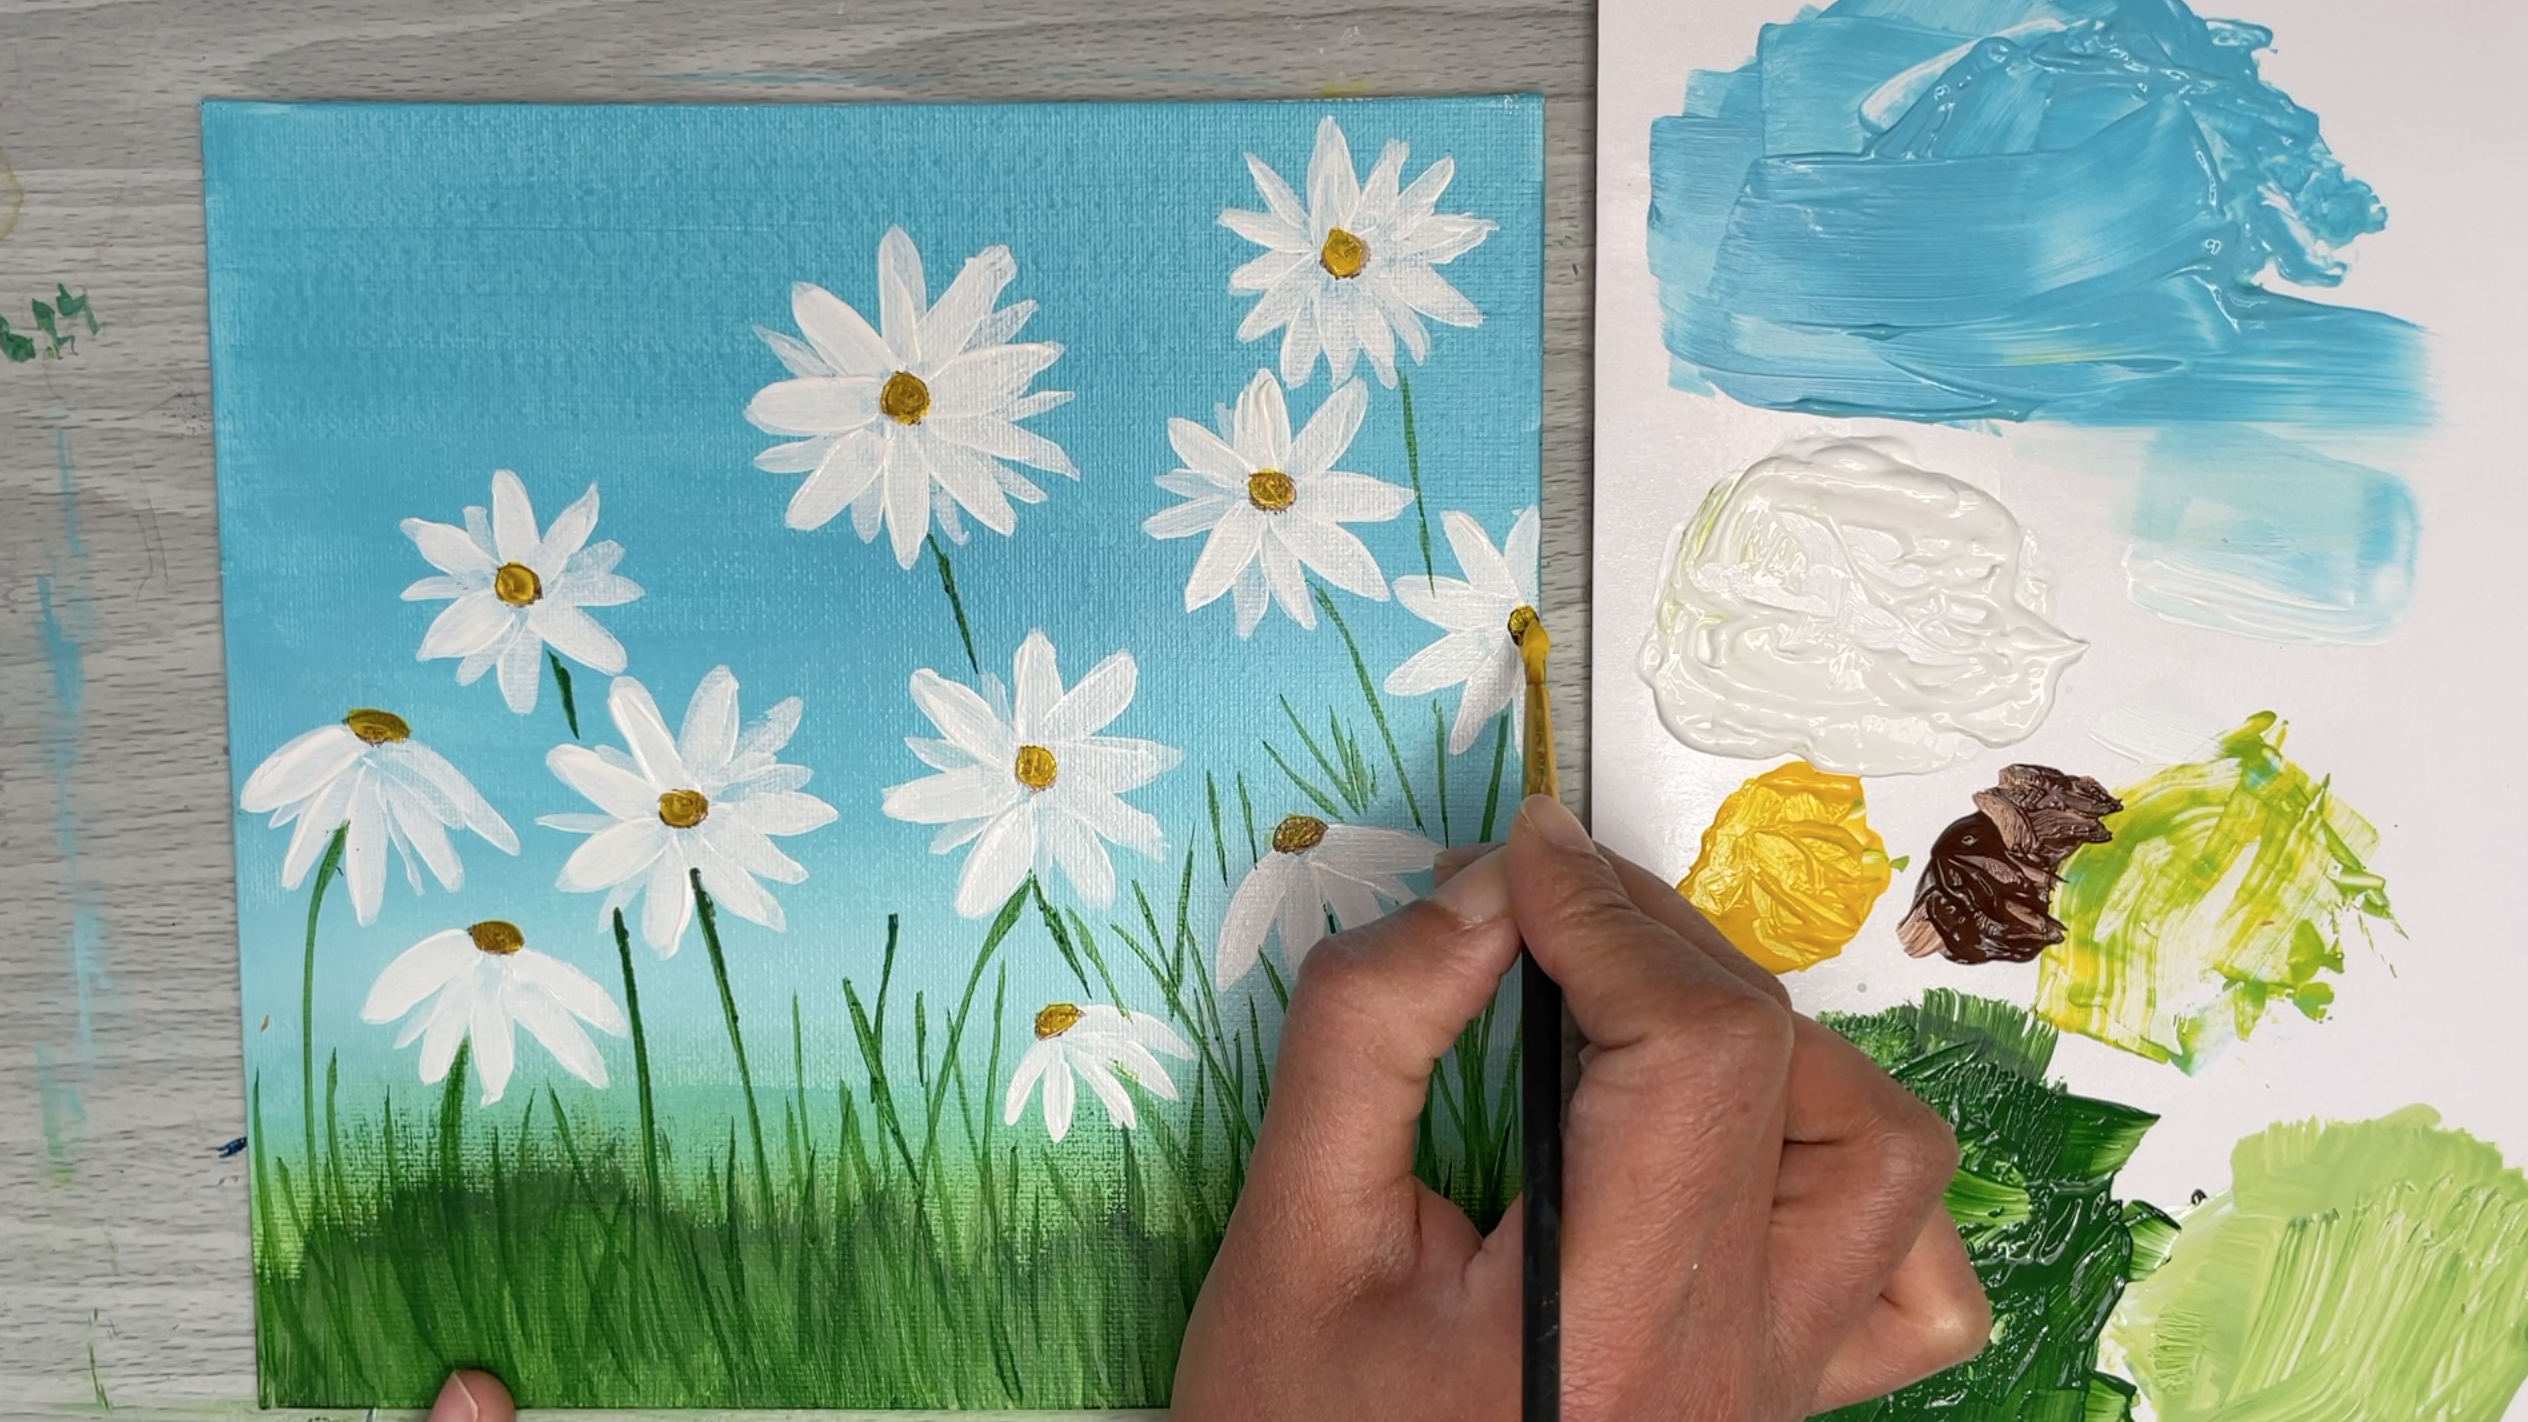 how to paint dasies white with yellow centers